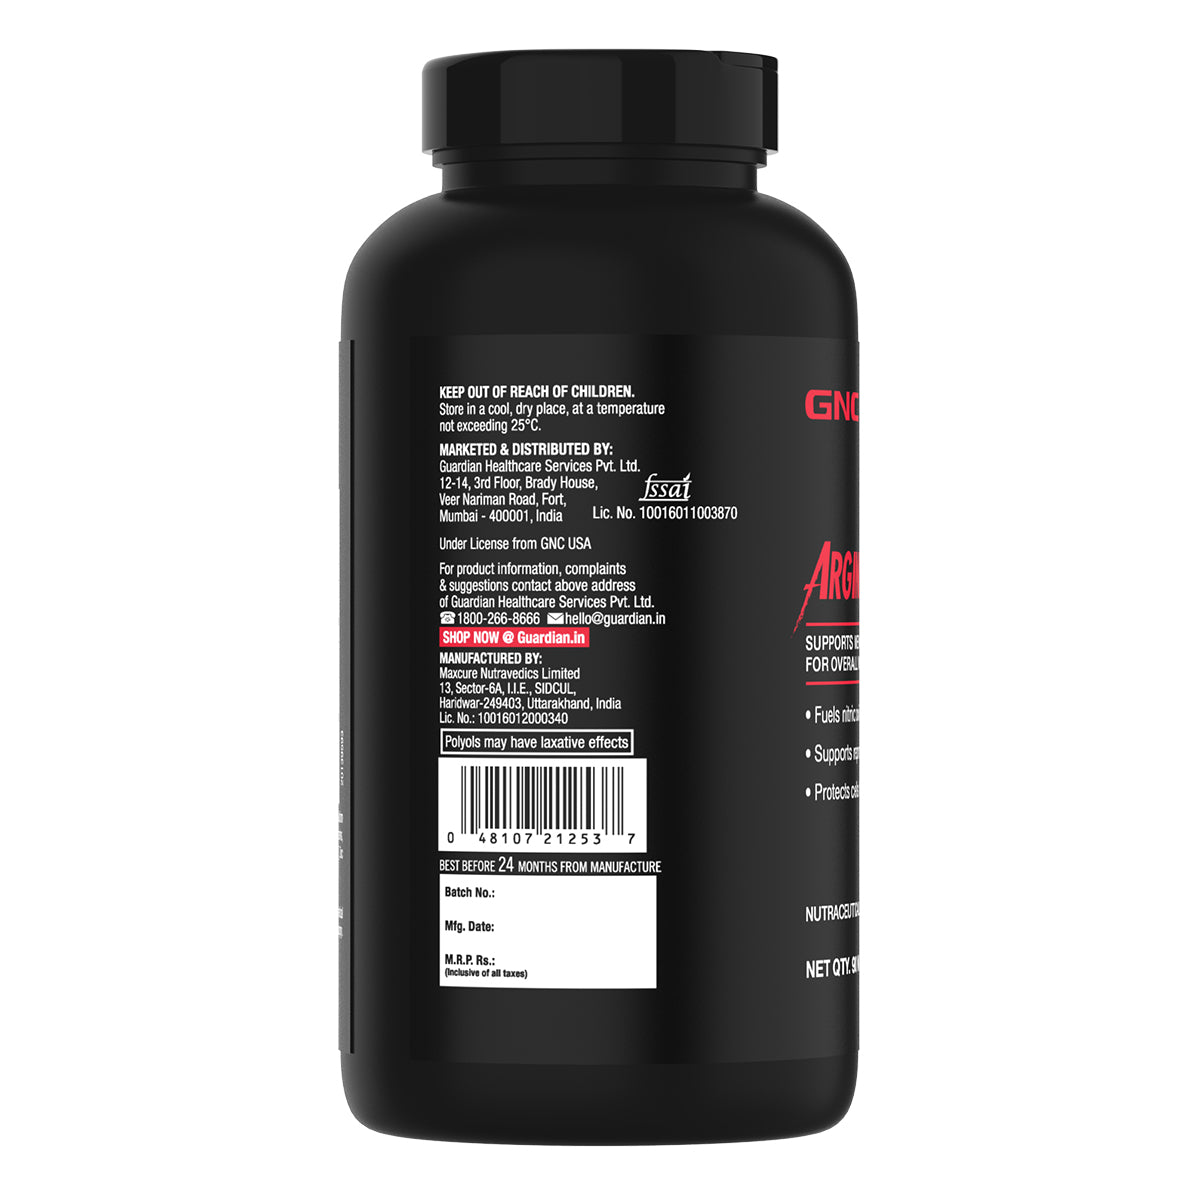 GNC Men's Arginmax - For Improved Sex Drive, Vitality & Sexual Performance